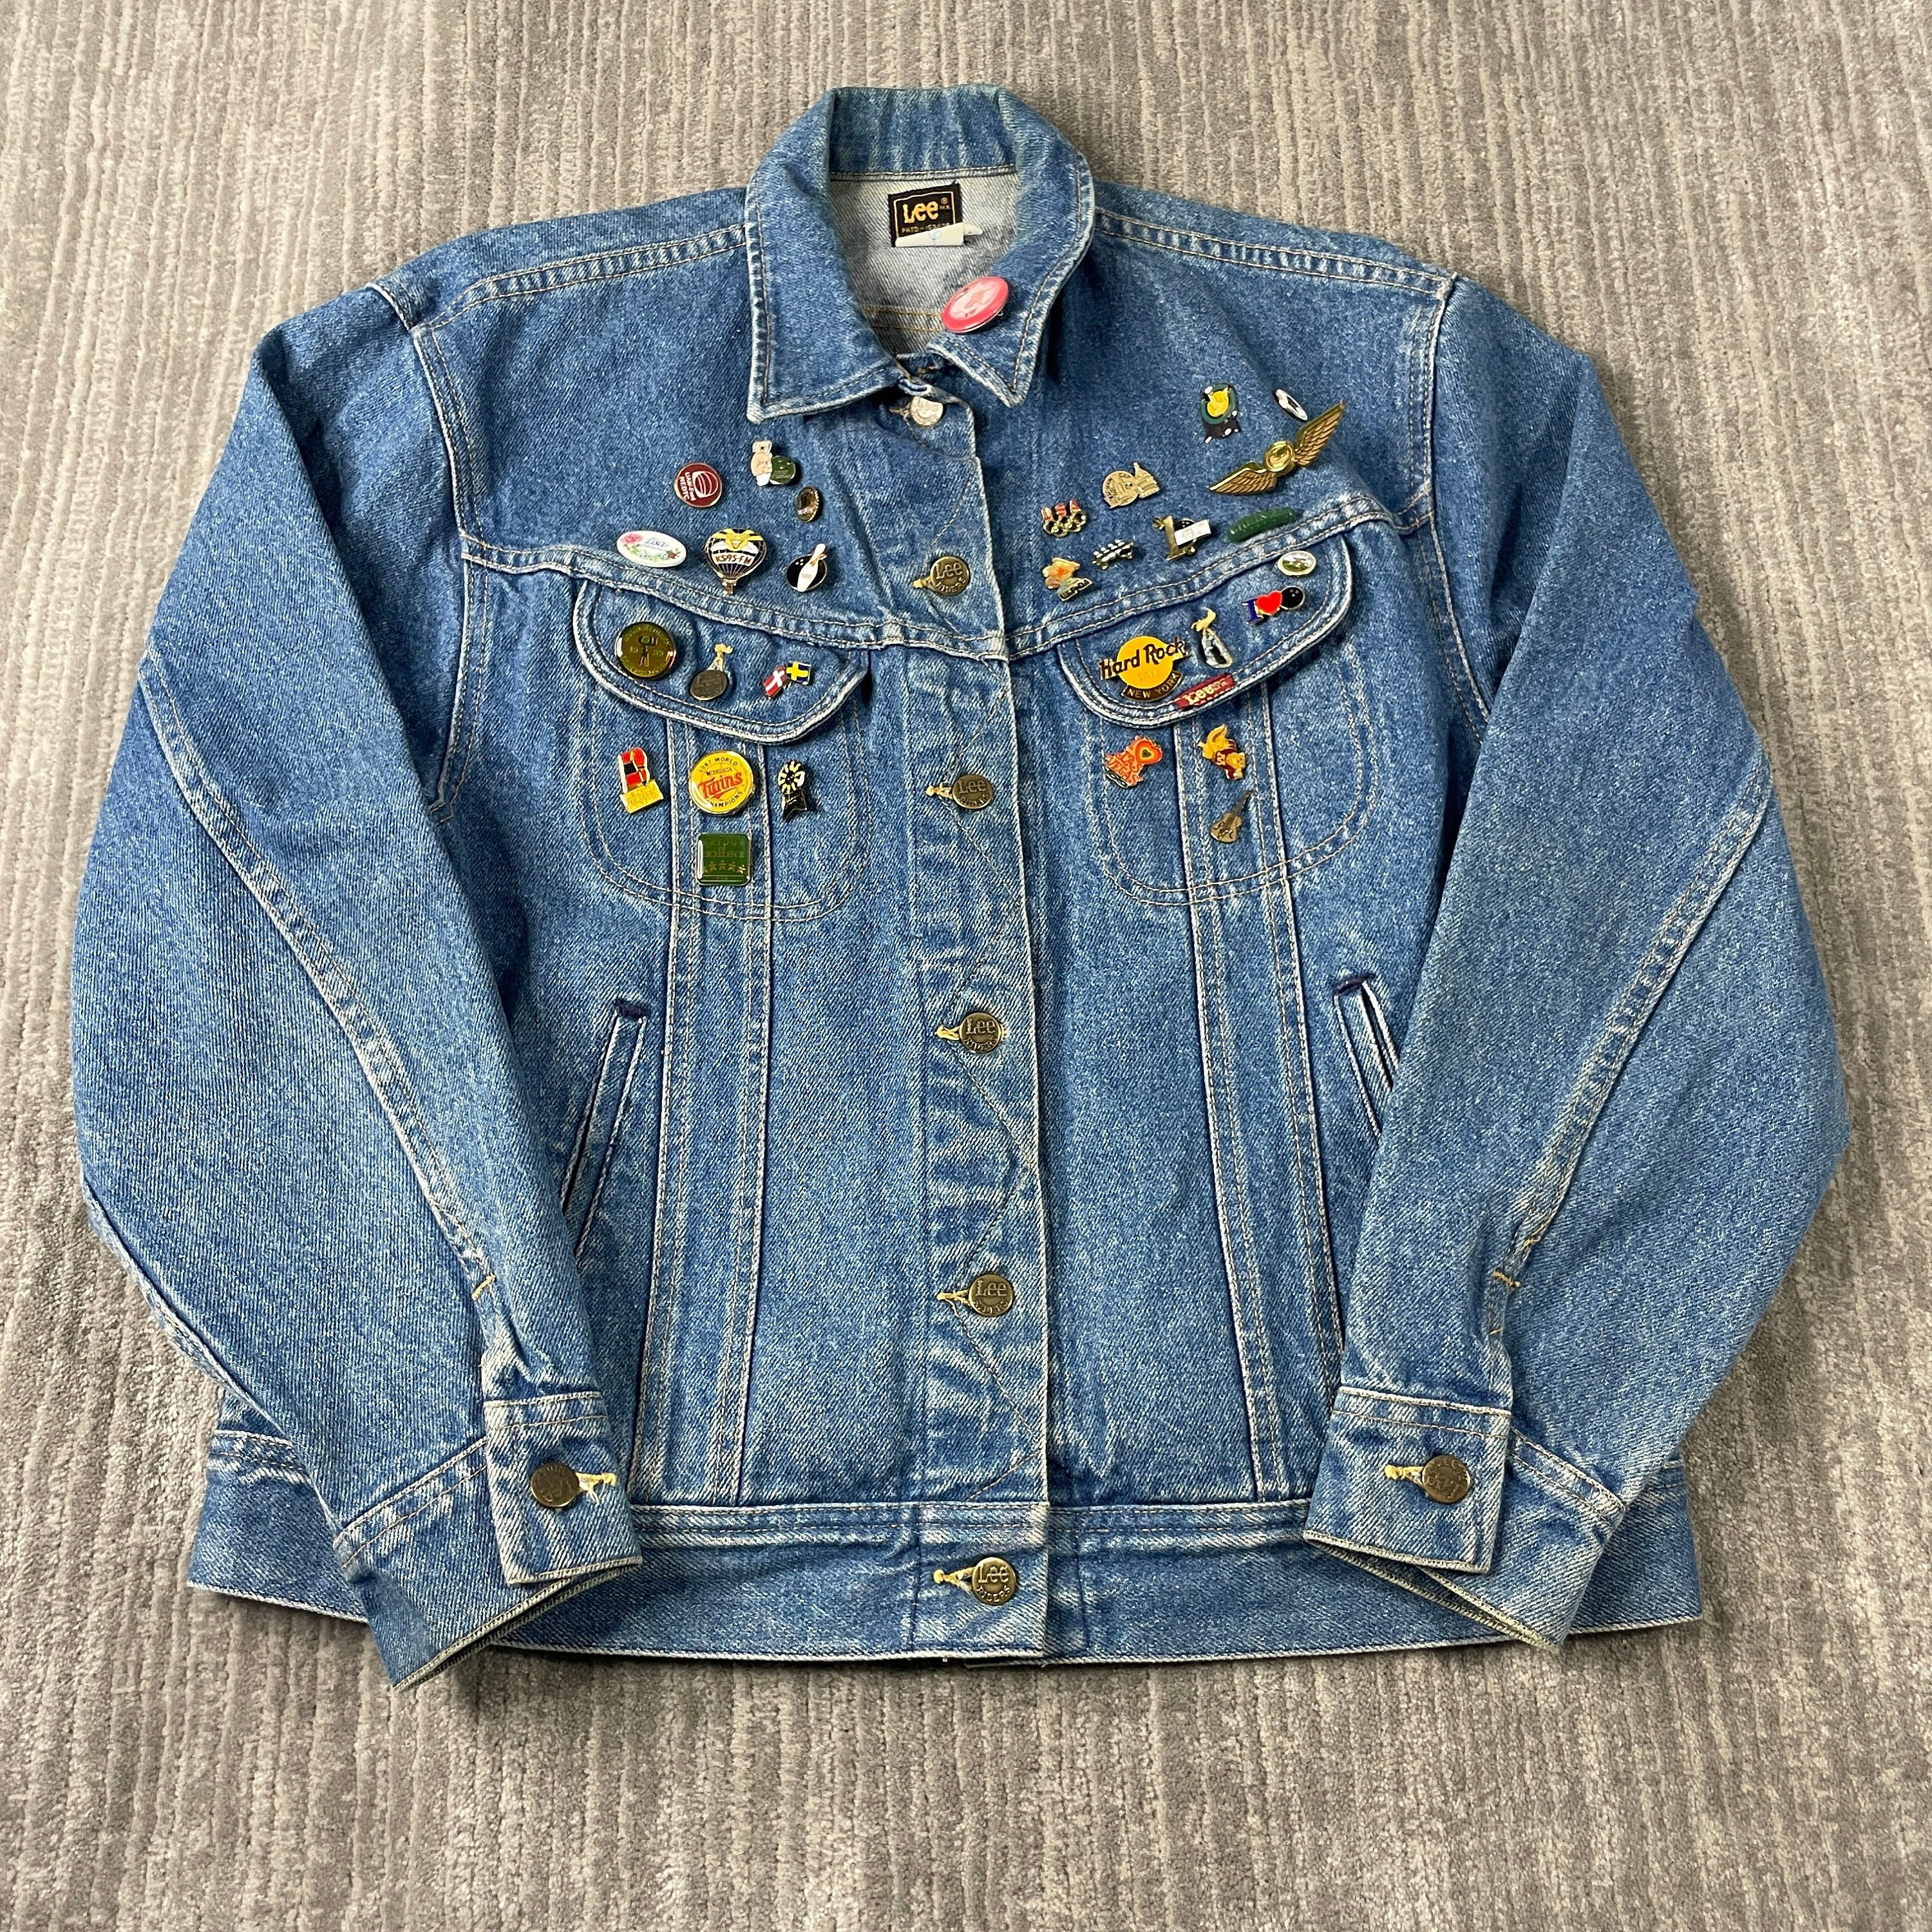 Pin on Men's Jackets Collection